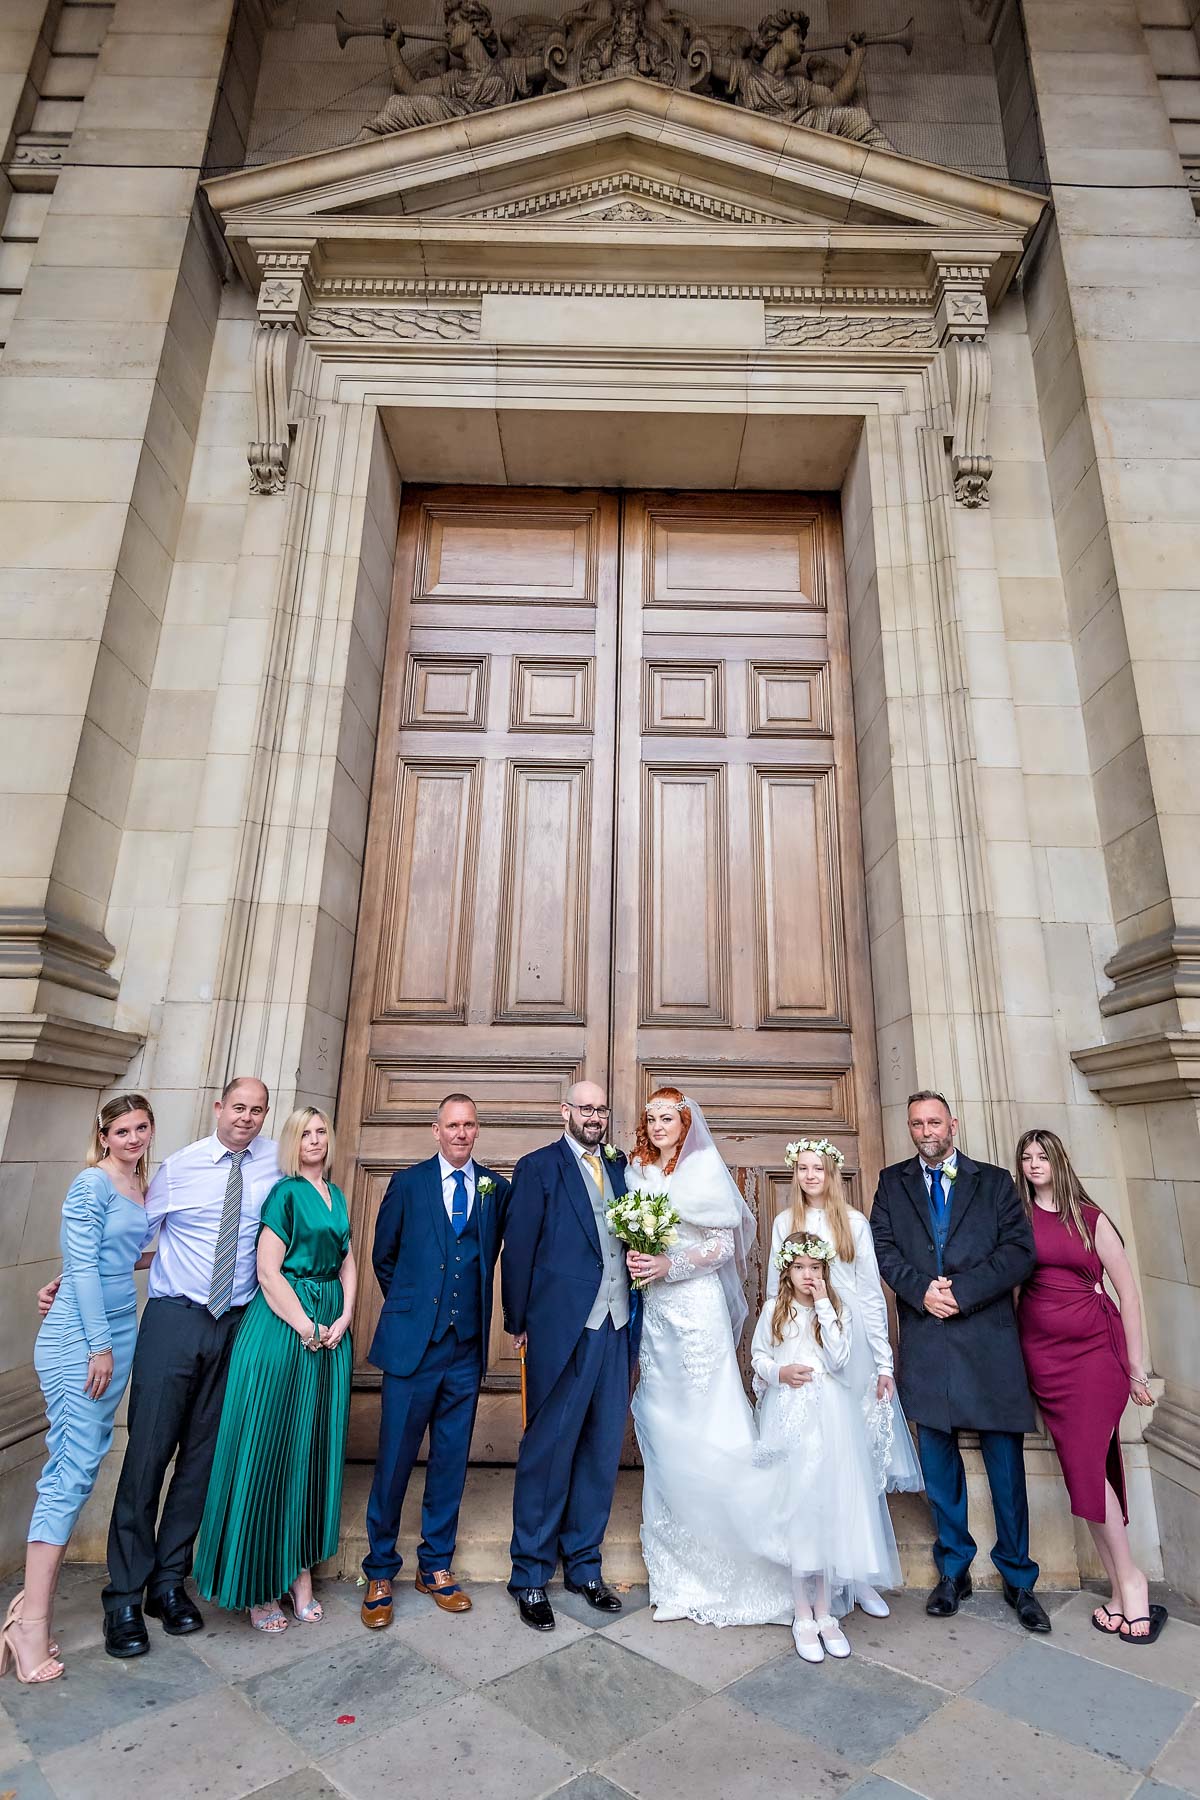 Wedding guests pose with couple outside the Brompton Oratory main doors